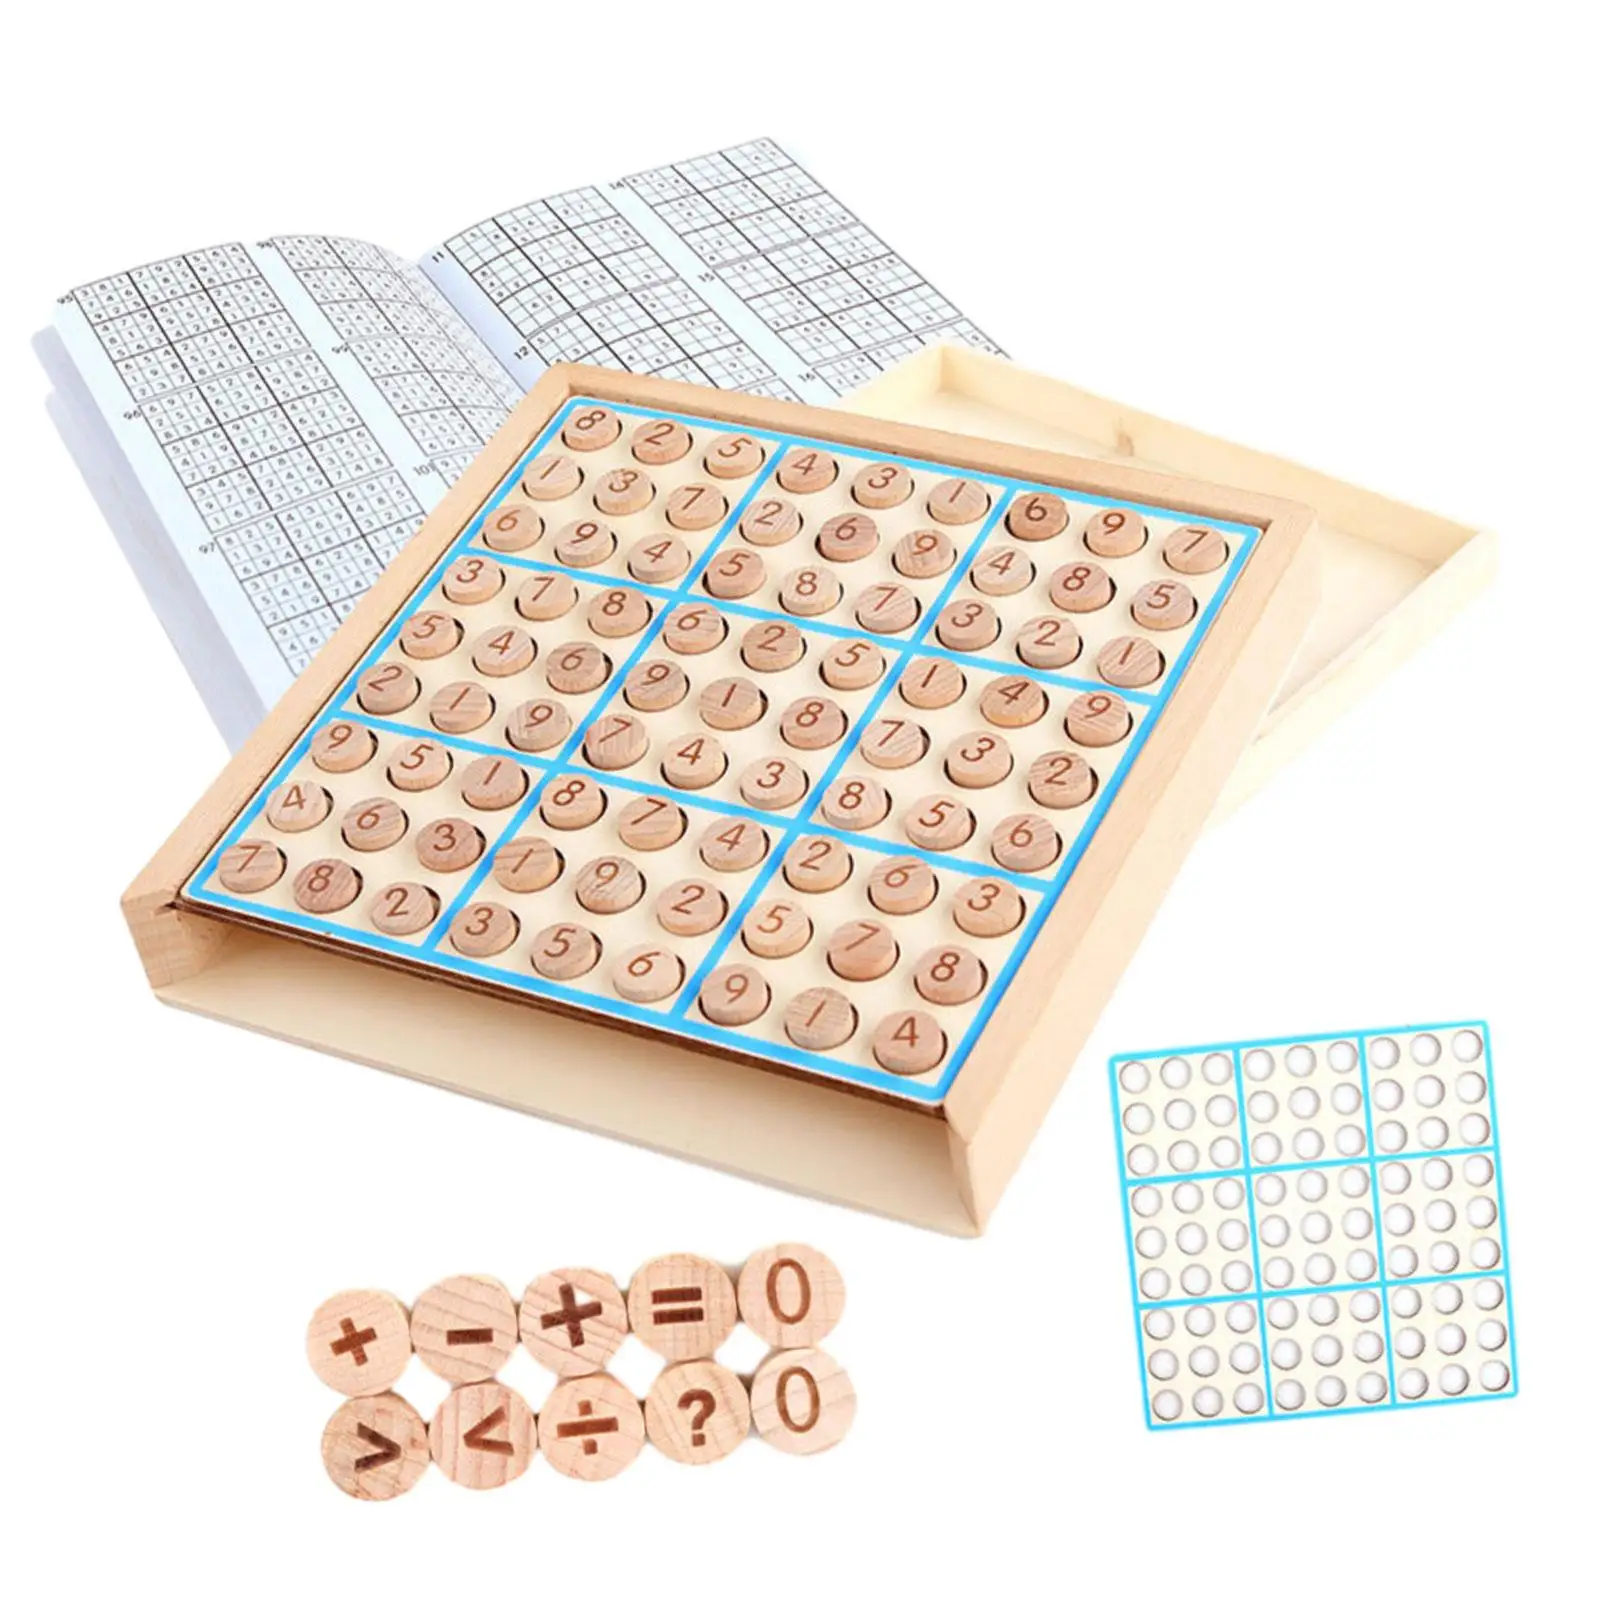 Wooden Sudoku Board Portable Sudoku Chess Toy Number Thinking Game Train Logical